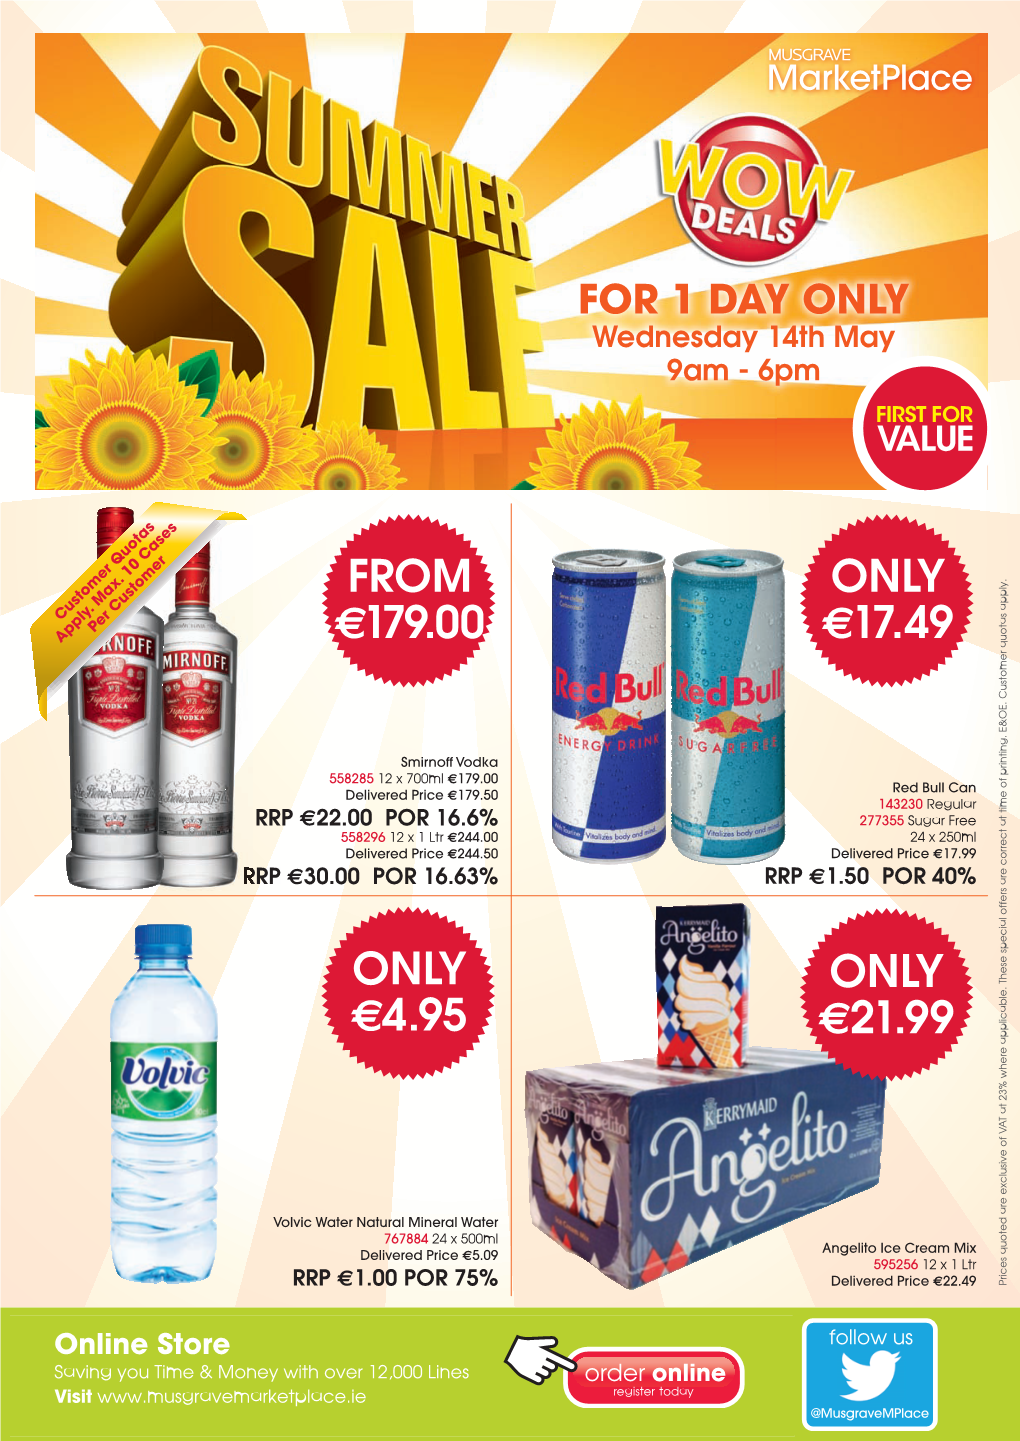 MP Summer Sale 2014 .Indd